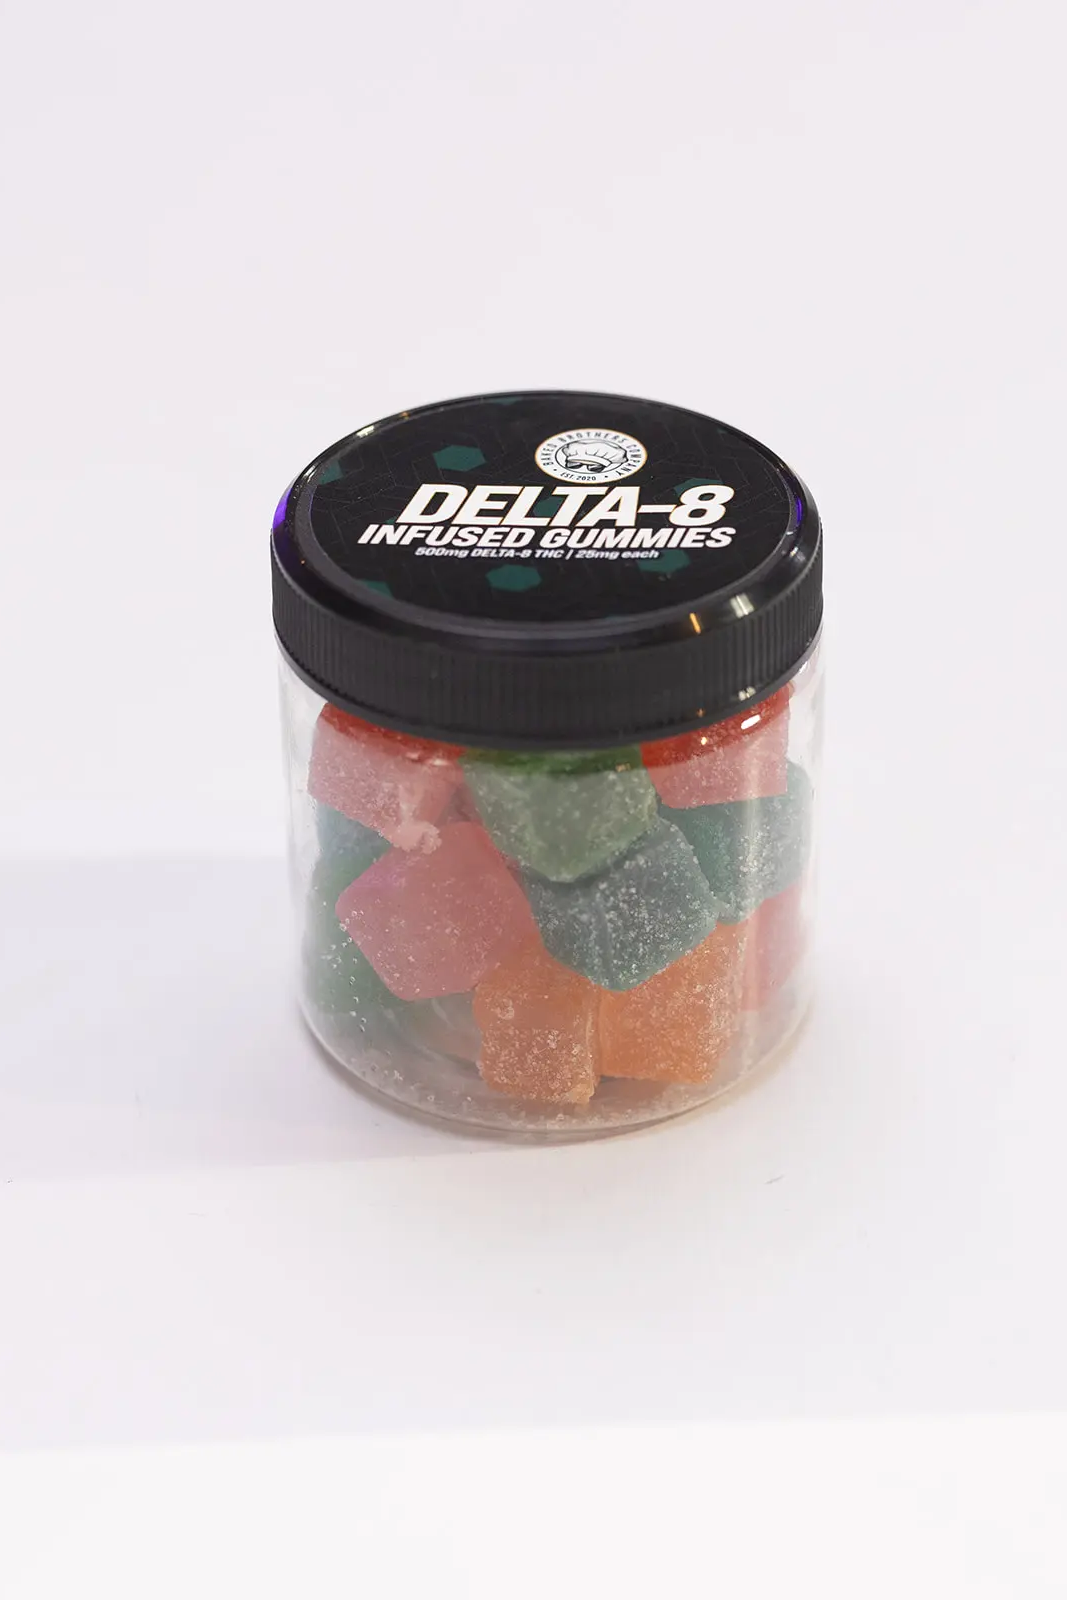 25mg Delta 8 Variety Cubes - 20 count